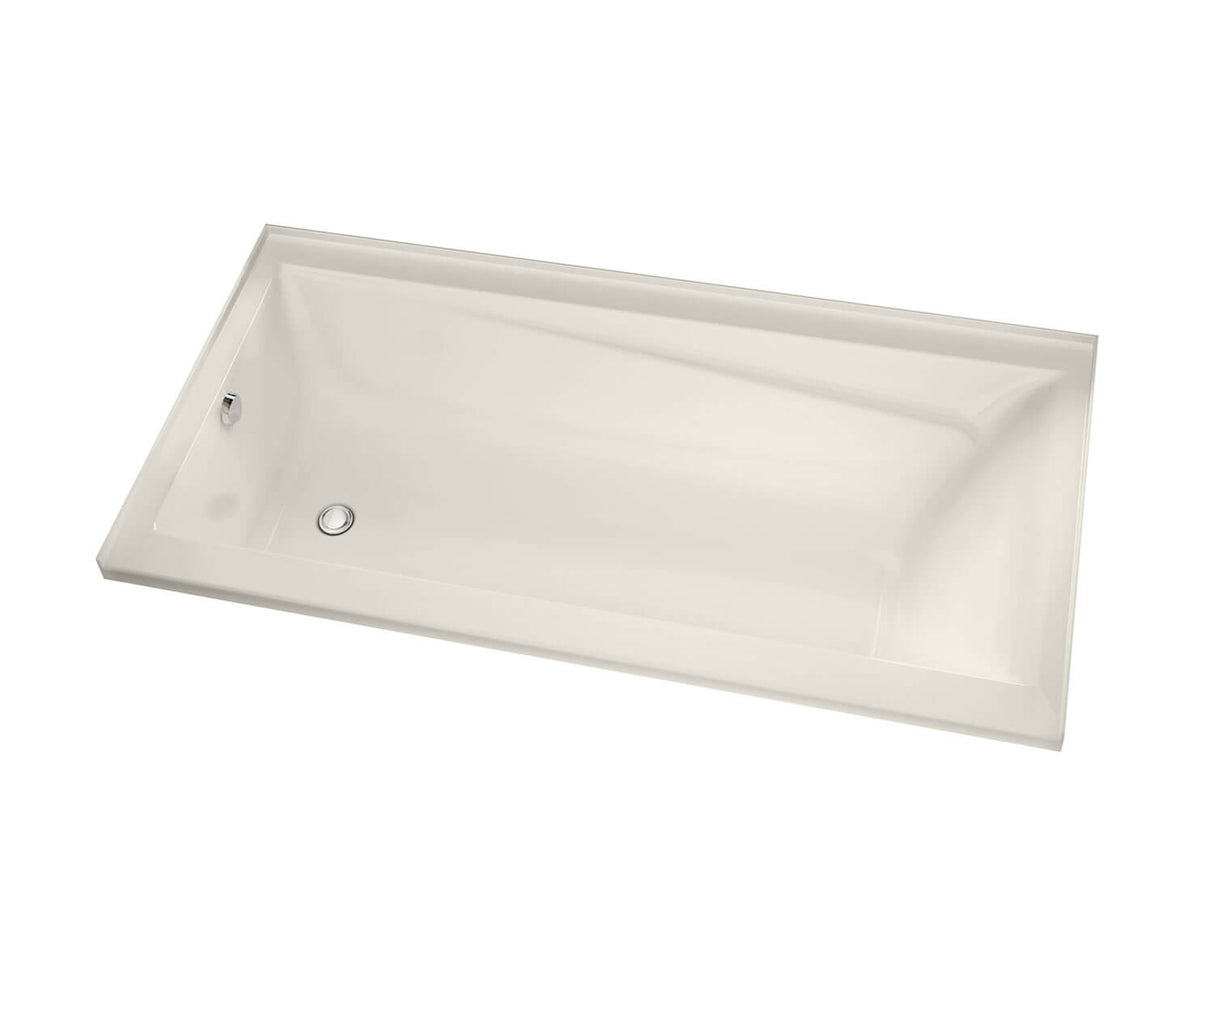 MAAX 106178-R-103-007 Exhibit 6636 IF Acrylic Alcove Right-Hand Drain Aeroeffect Bathtub in Biscuit